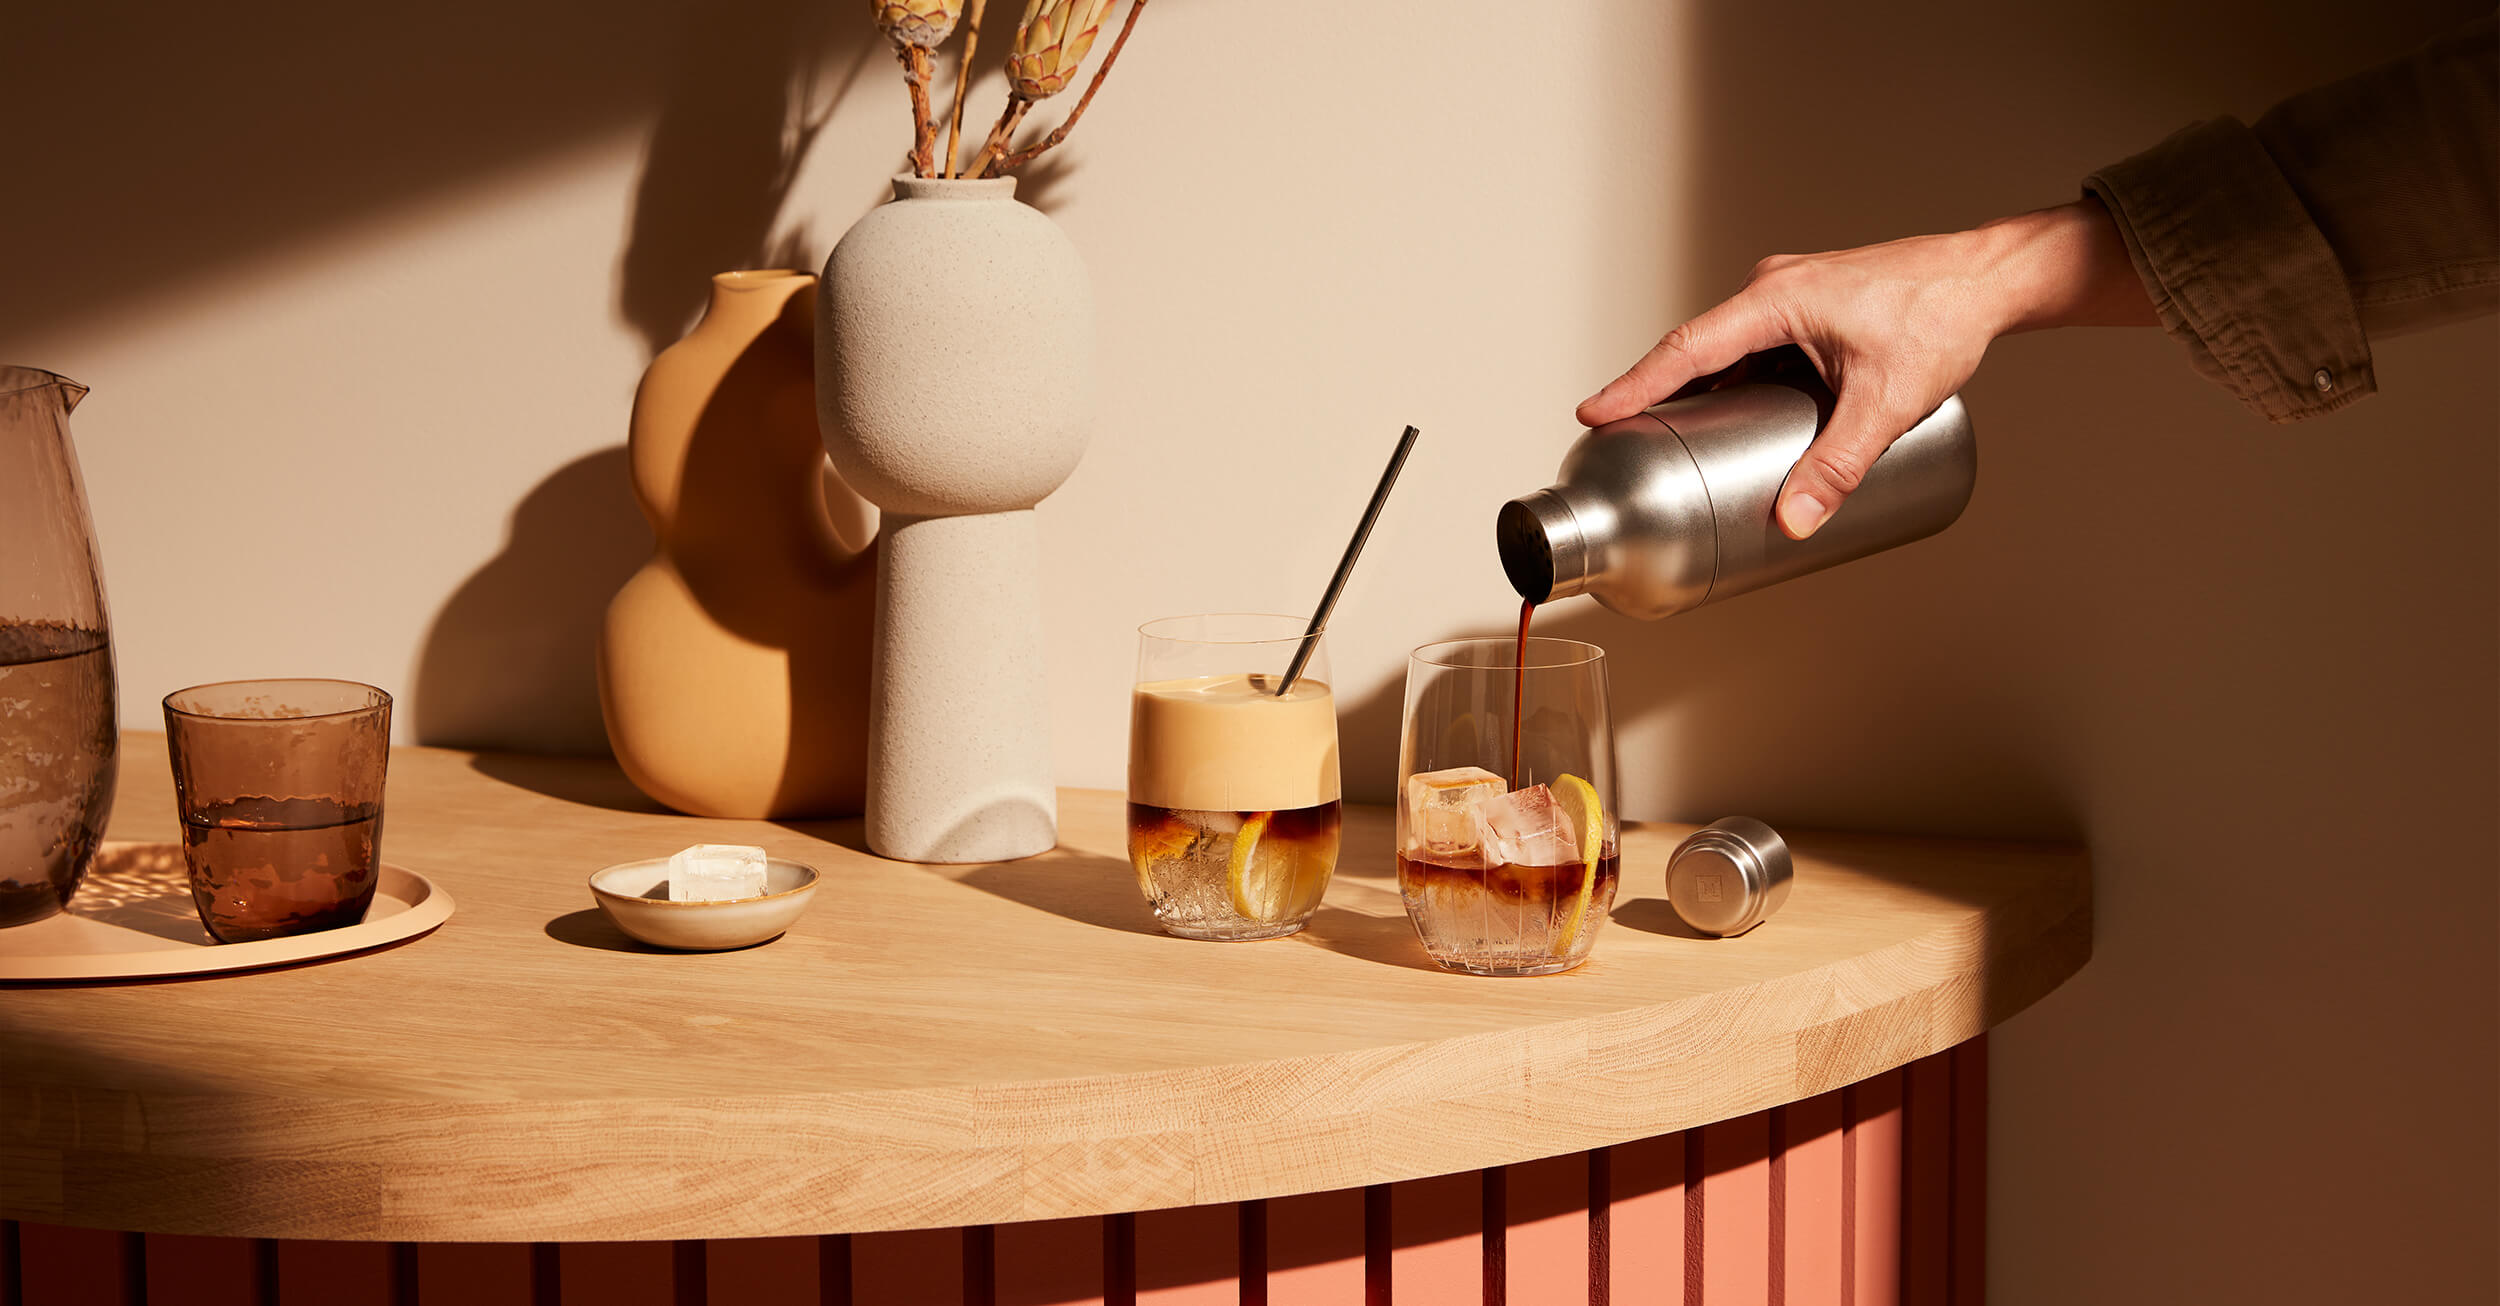 Cool down with Nespresso iced coffee